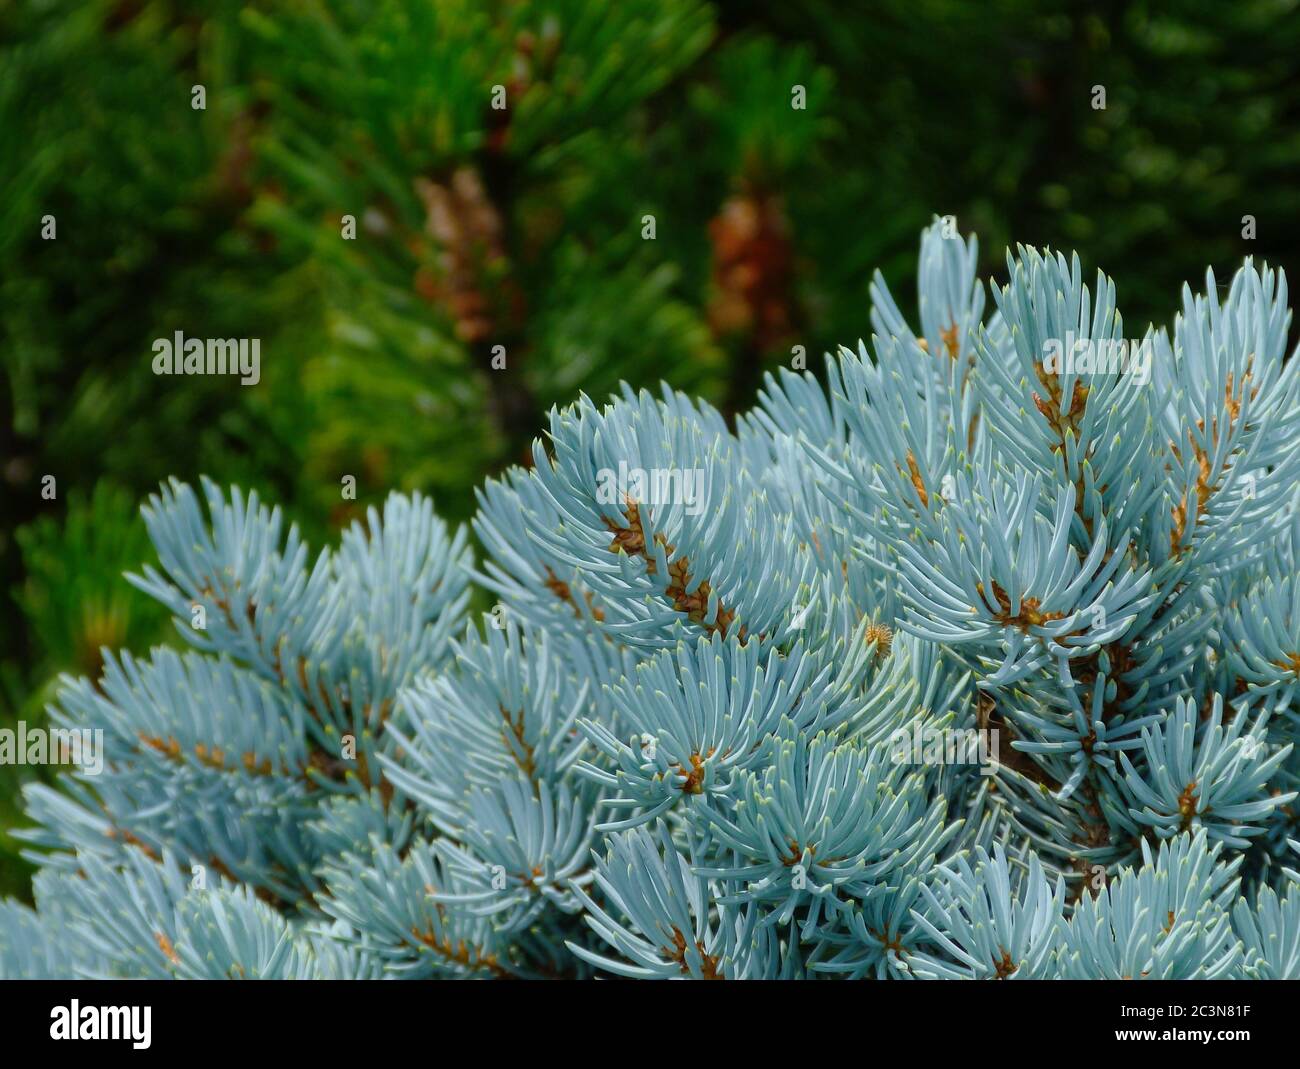 Silver green color blue spruce tree detail. lush emerald green pine and arborvitae evergreen in the background. dense foliage. soft green garden scene Stock Photo